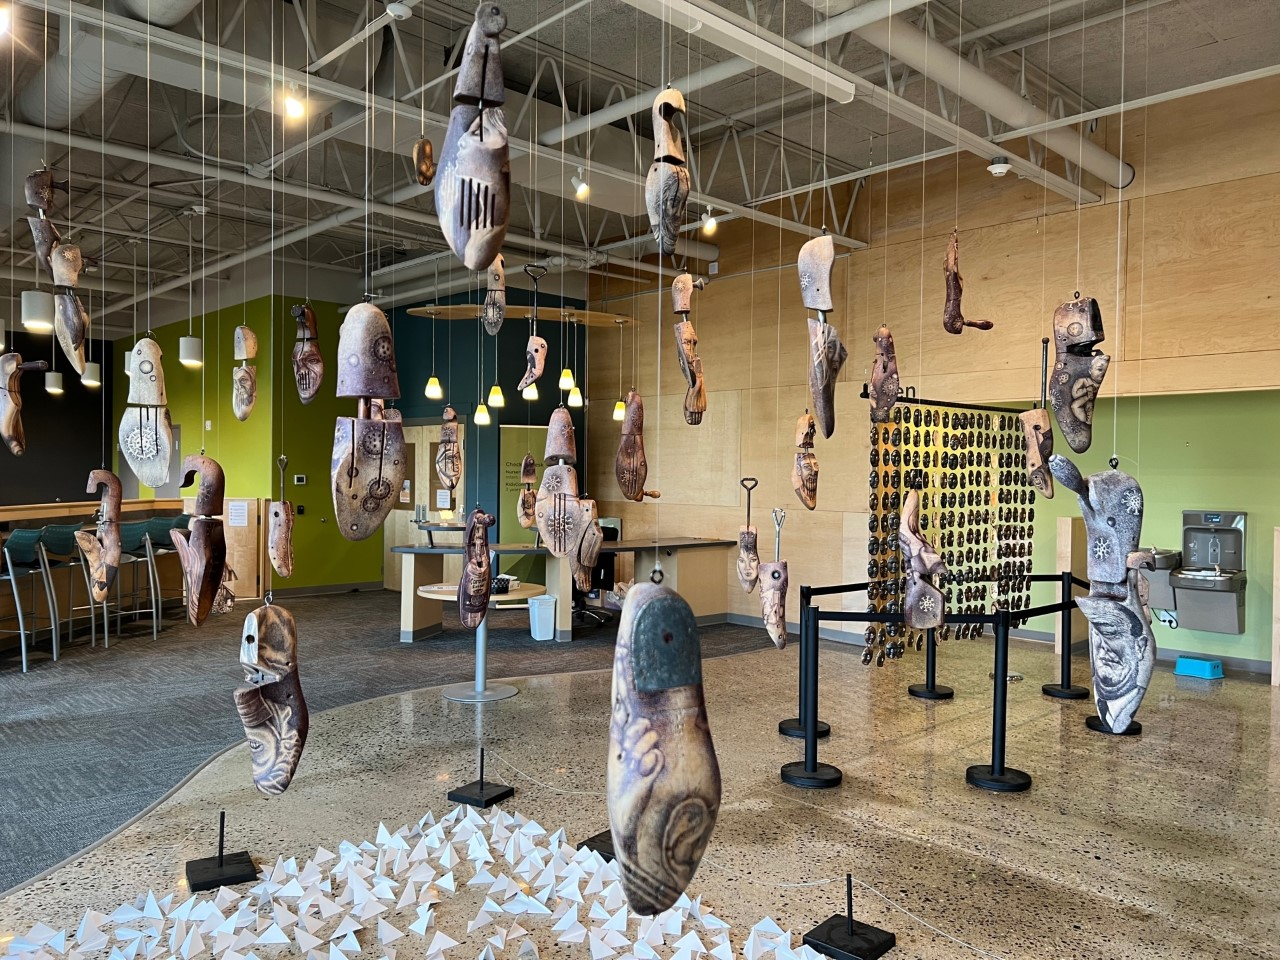 Image shows art installation by artist Mo Juaw: wooden shoe forms suspended from ceiling with various illustrations on them